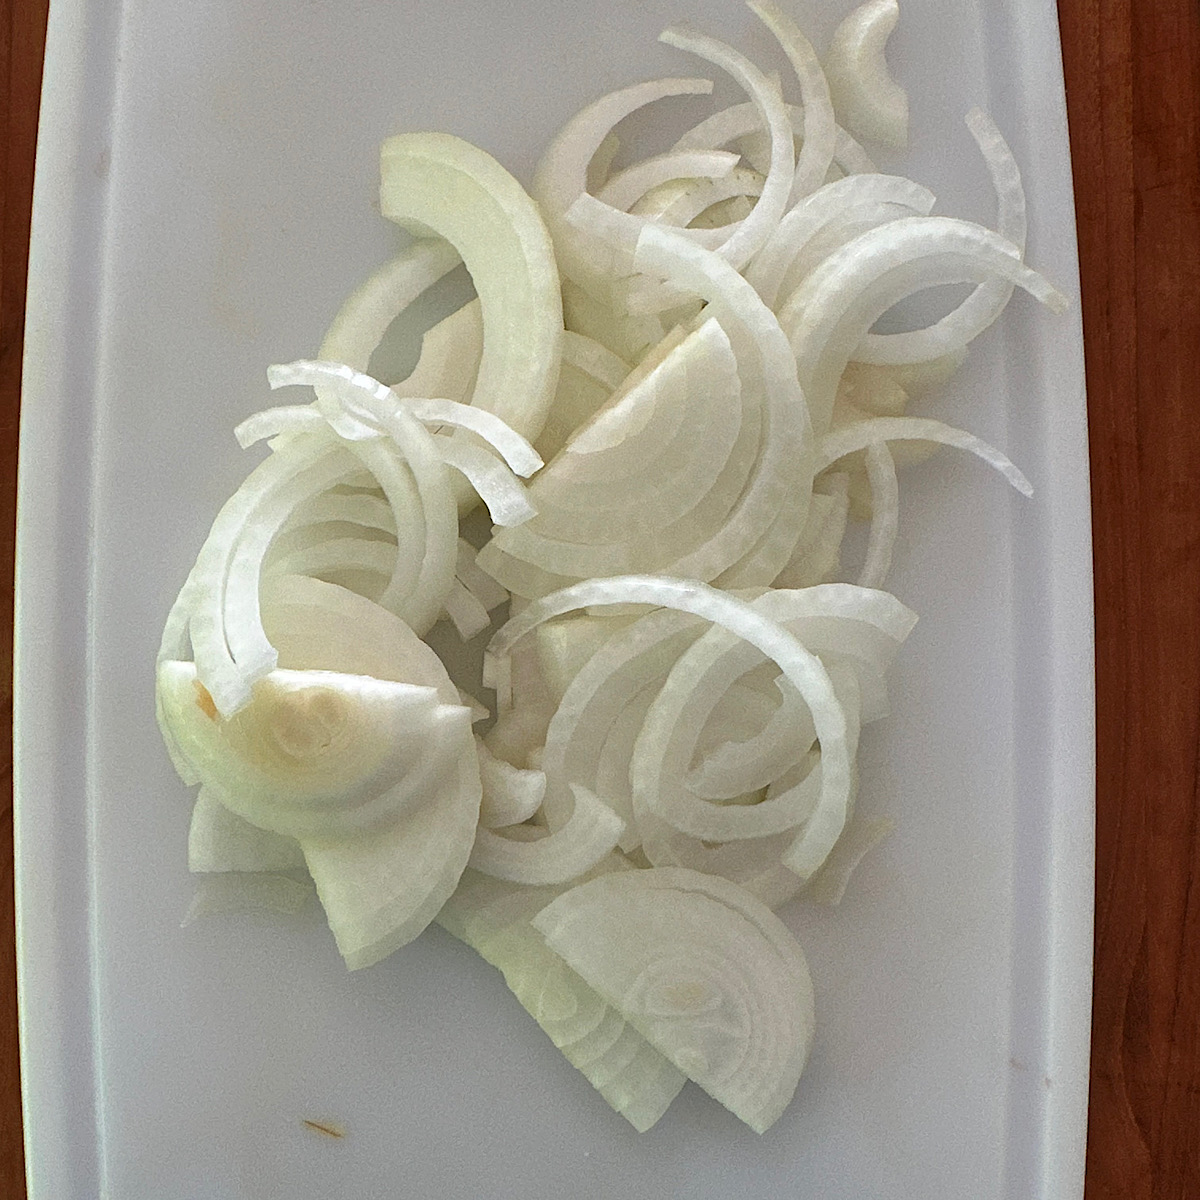 Sliced onions on a white cutting board.